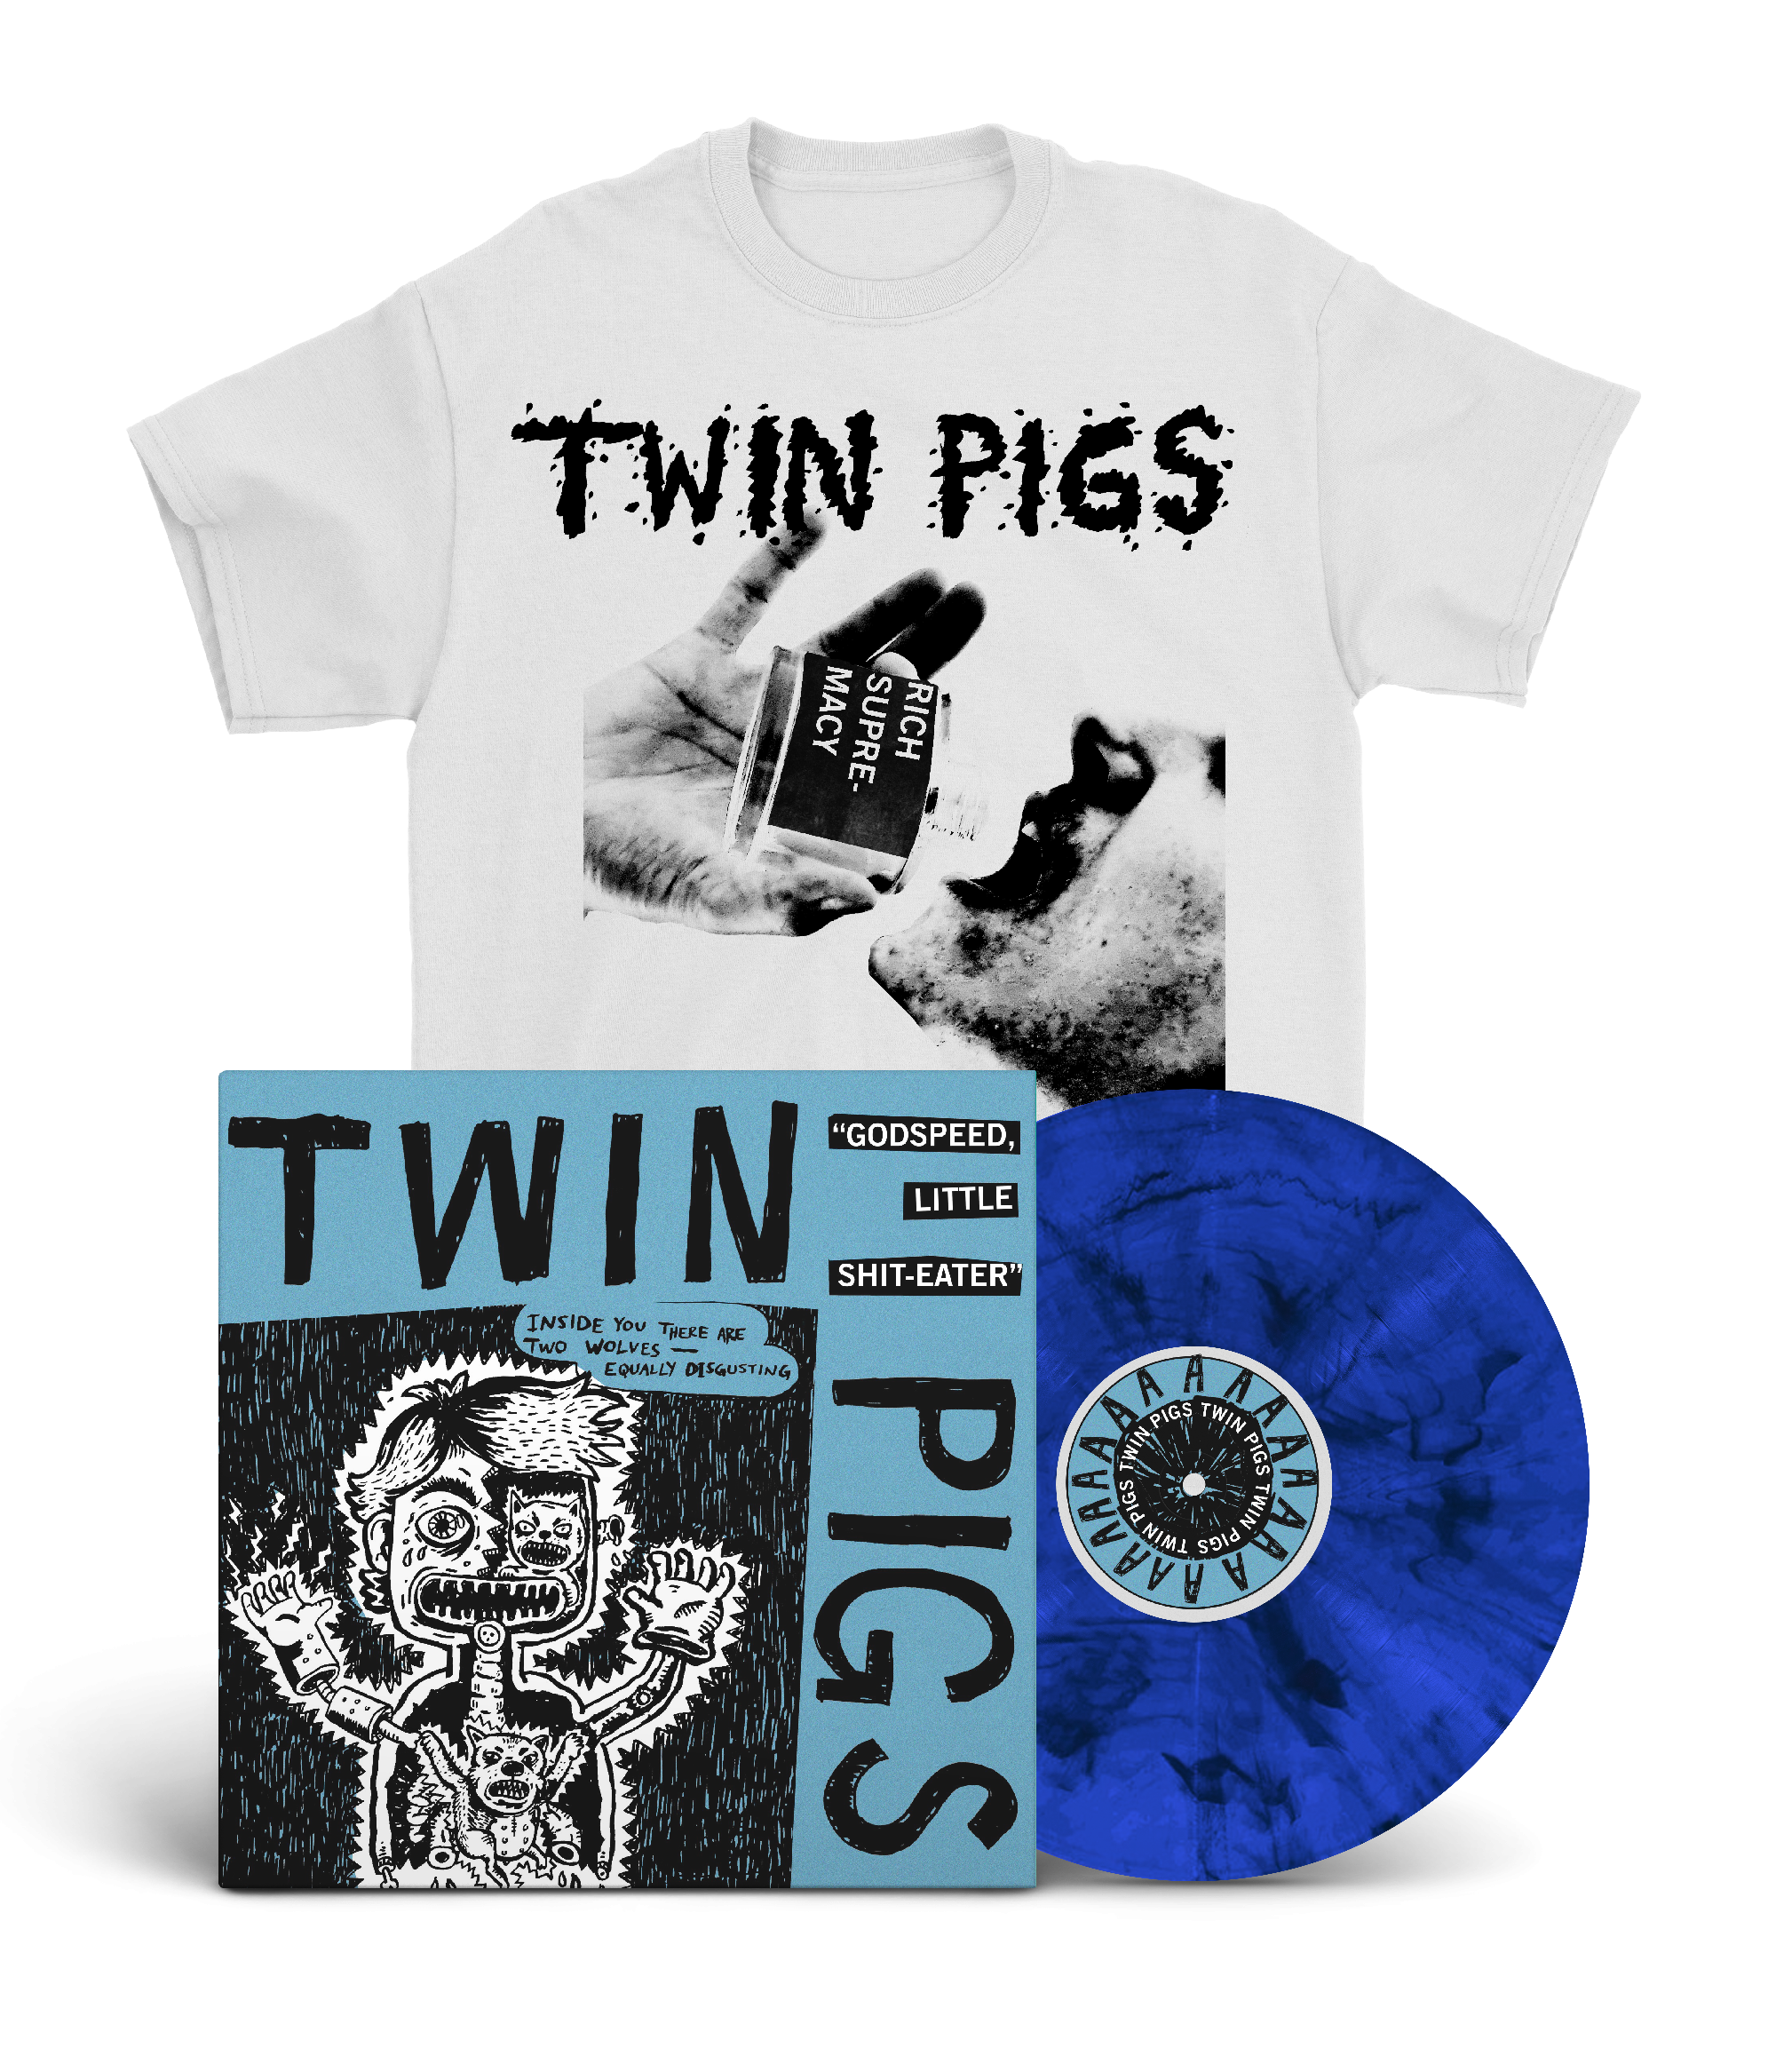 Twin Pigs - Godspeed, Little Shit-Eater LP (limited Fanpackage, blue marbled vinyl)